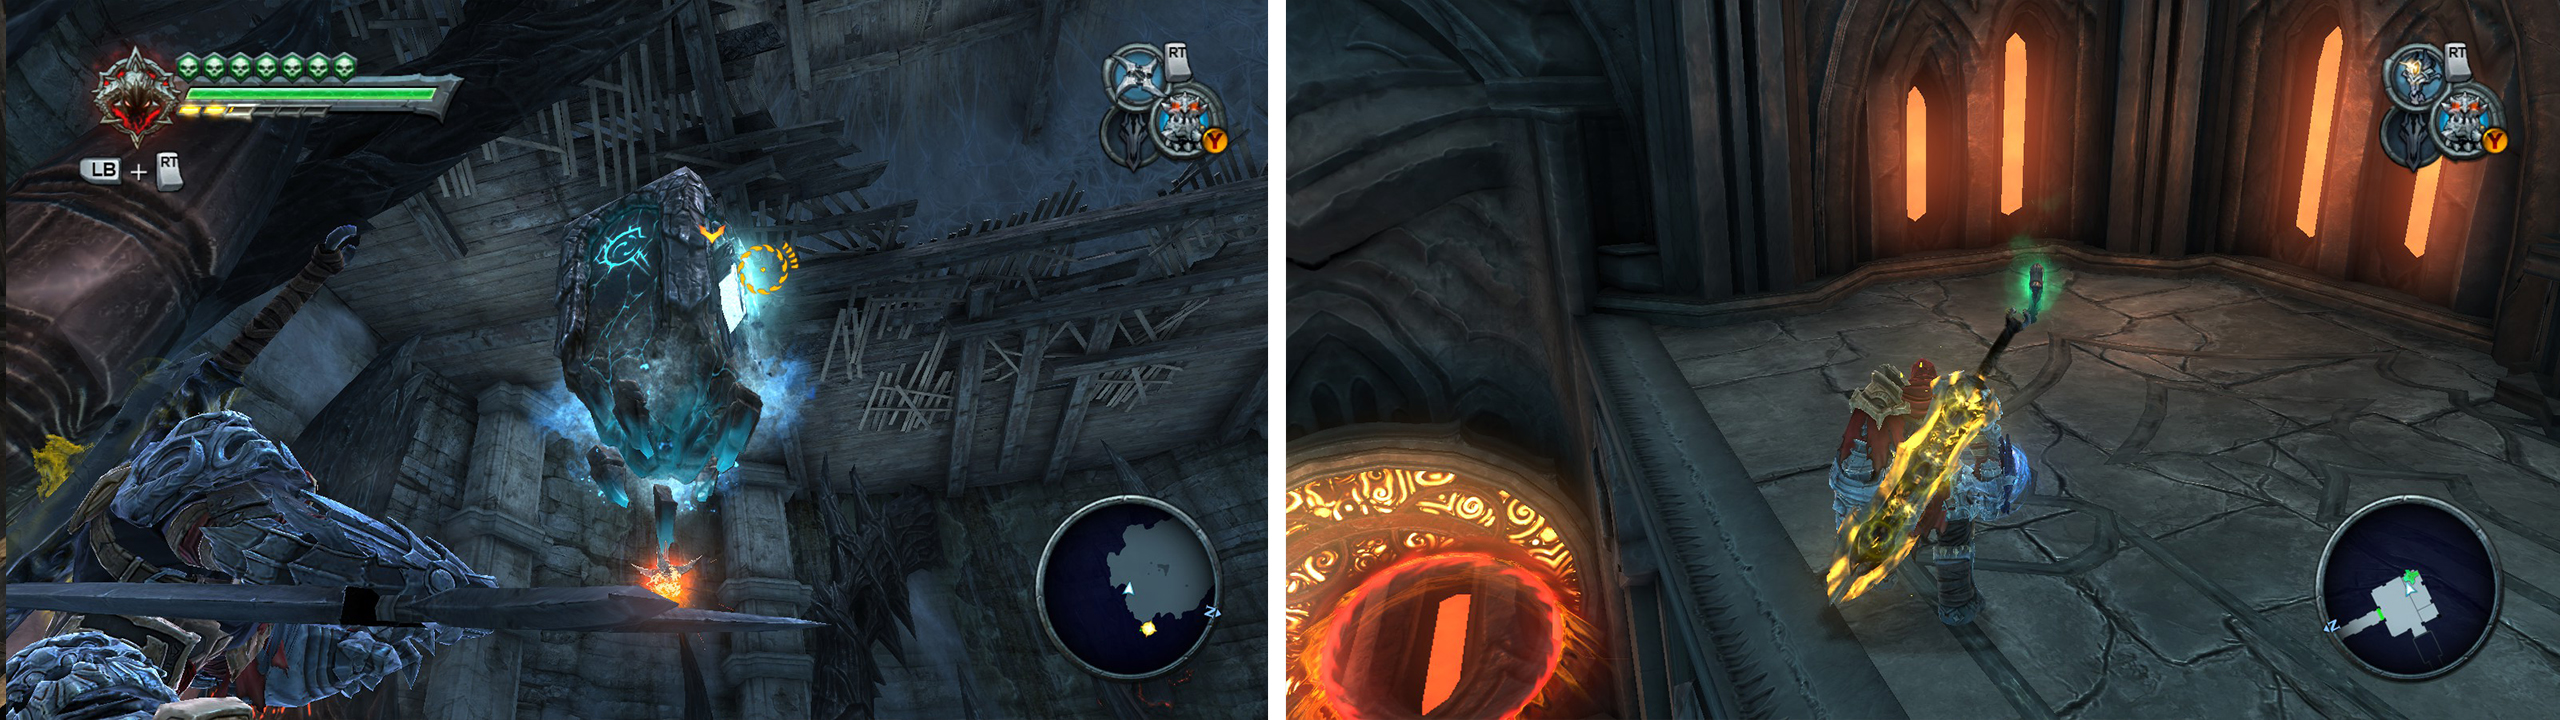 After beating Silitha in the Iron Canopy, use the lift (left) to go up to the previous area, the Artefact is behind a rock. In the first room of the third wing of the Black Throne, there are portal pads to get to this Artefact (right).